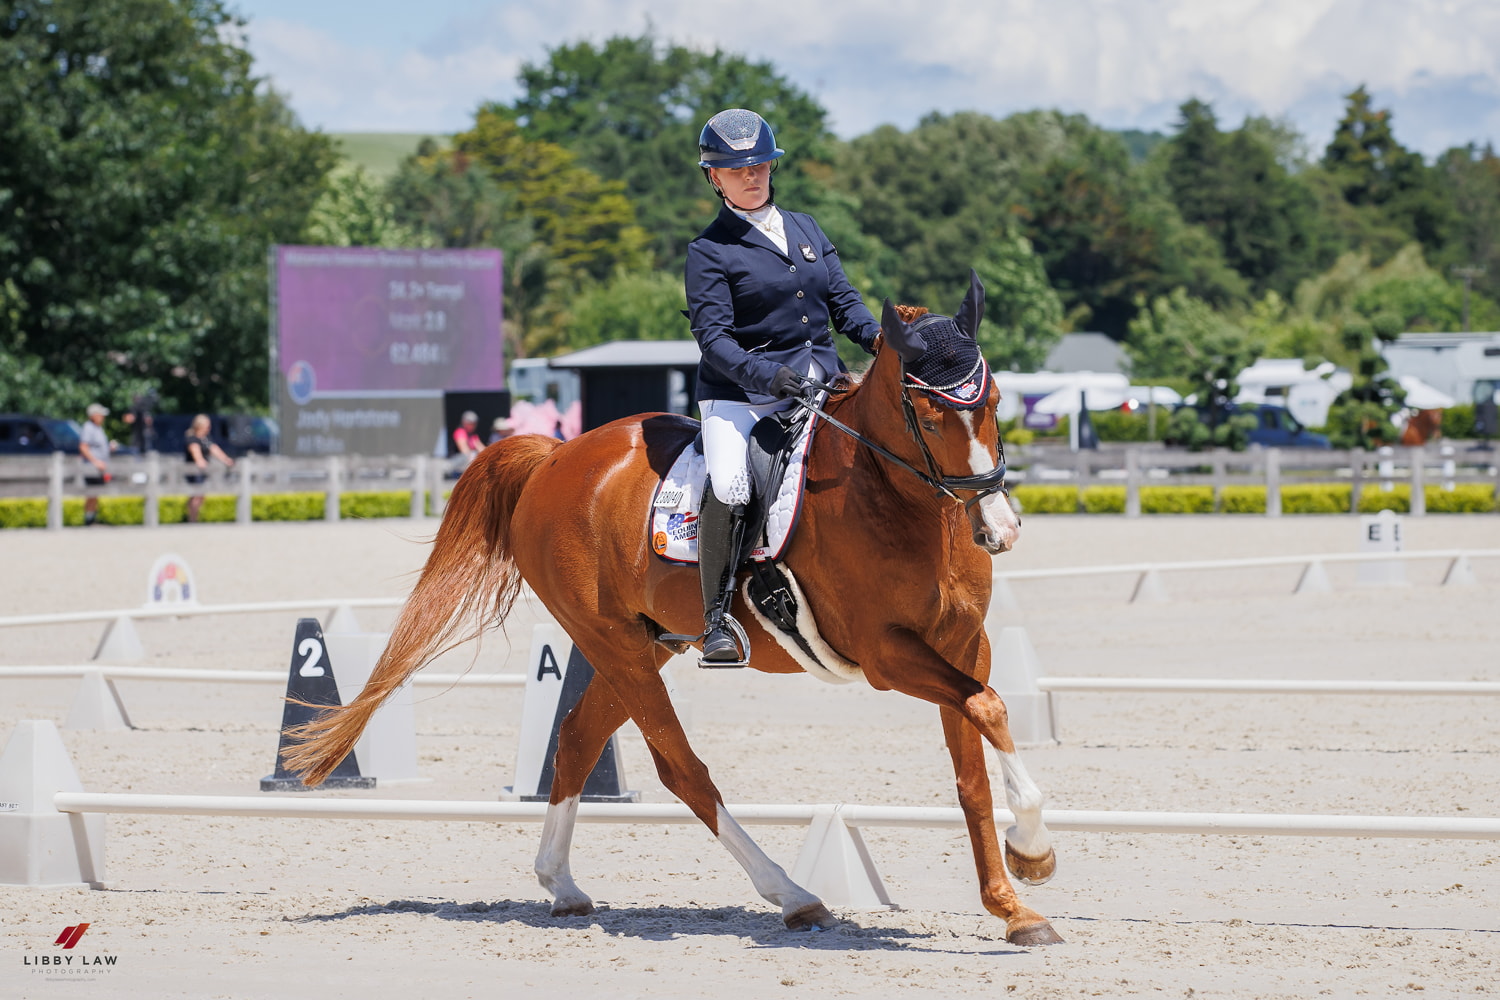 Louise wears a navy jacket and white jodhpurs as she competes in dressage on a chestnut horse.